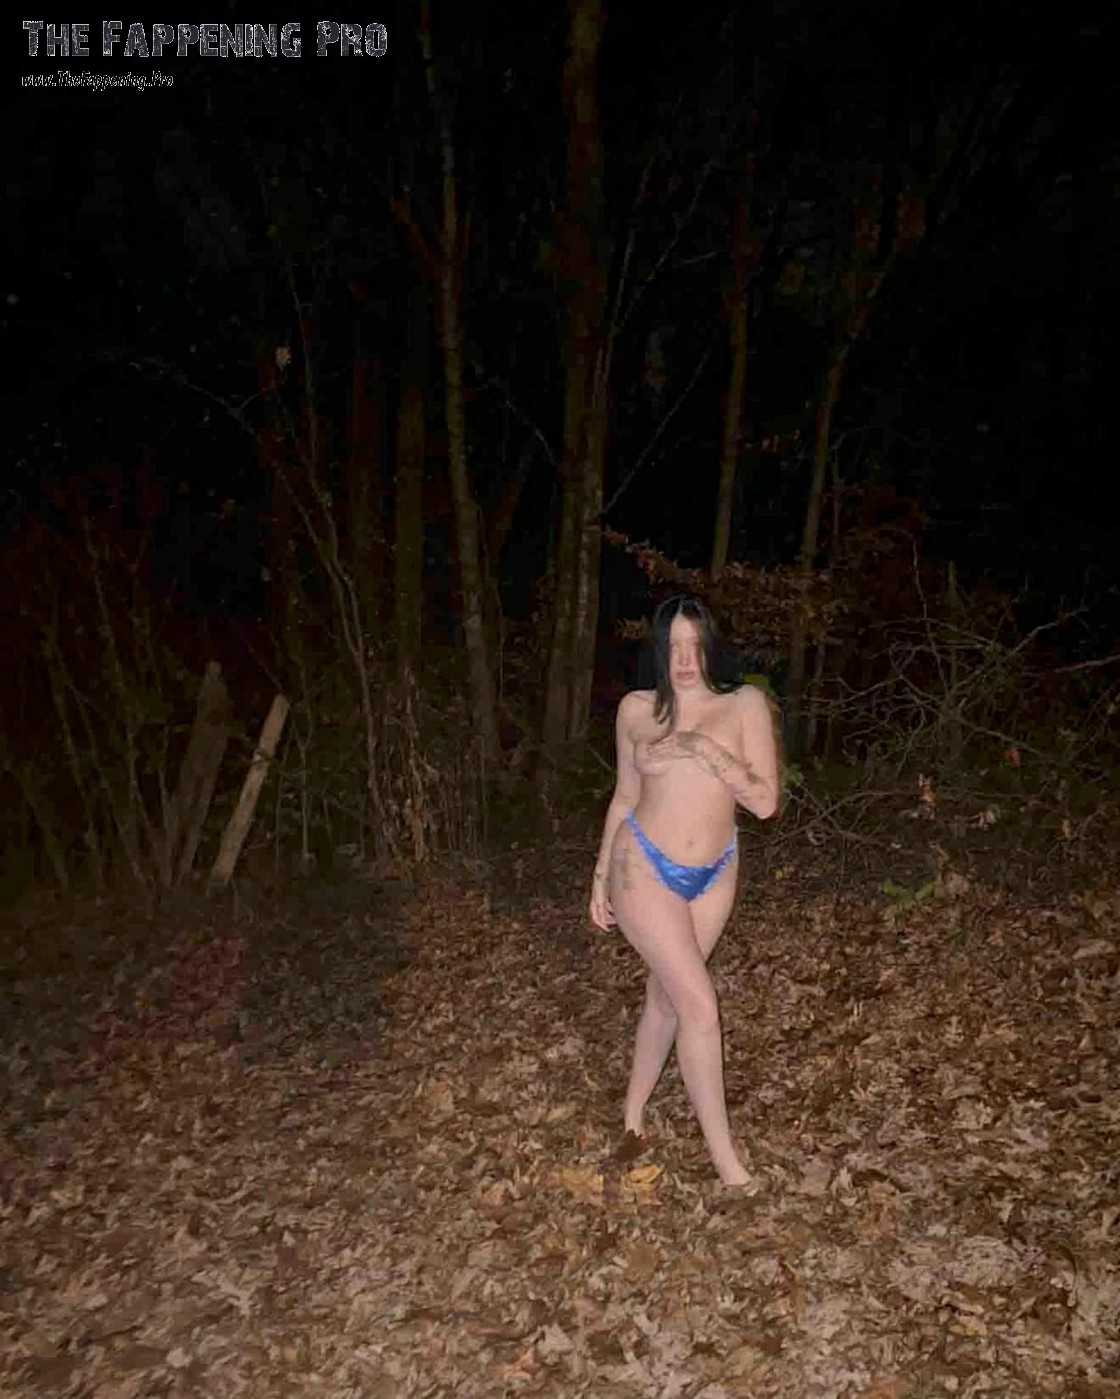 In a shocking turn of events, new photos of Noah Cyrus topless have surfaced online, taken in a mysterious forest setting. The blurry footage and poor lighting only add to the intrigue, as Noah Cyrus is captured in nothing but tiny panties, leaving little to the imagination. The photos have caused a frenzy among her 6 million Instagram followers, with many reacting passionately to the unexpected reveal. Is it art or simply a scandalous mistake? Only time will tell.